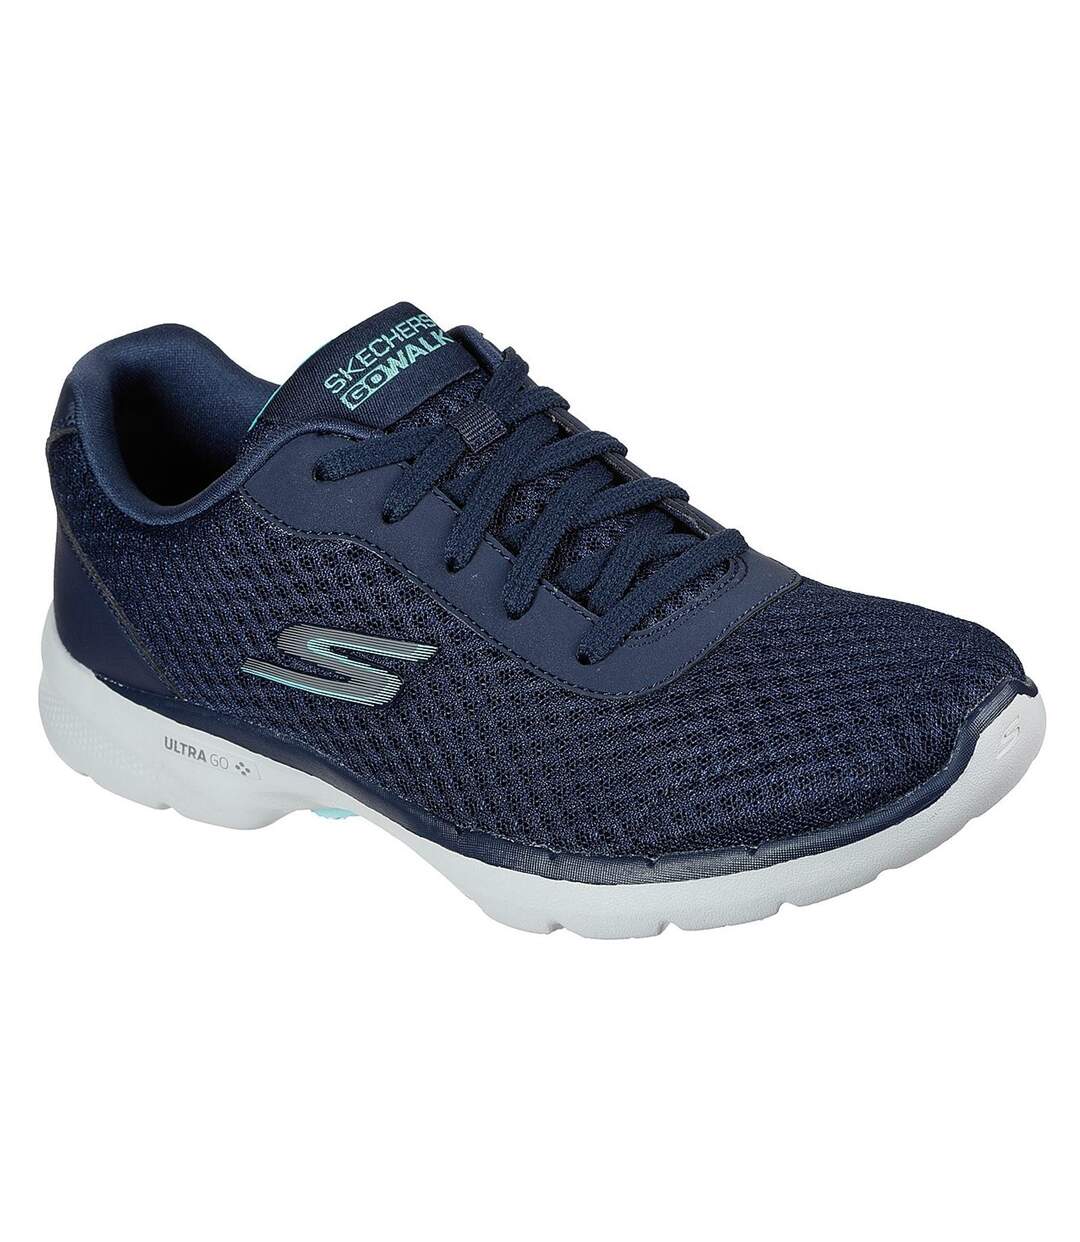 Skechers Womens/Ladies GOwalk 6 Iconic Vision Quilted Shoes (Navy/Turquoise) - UTFS8323